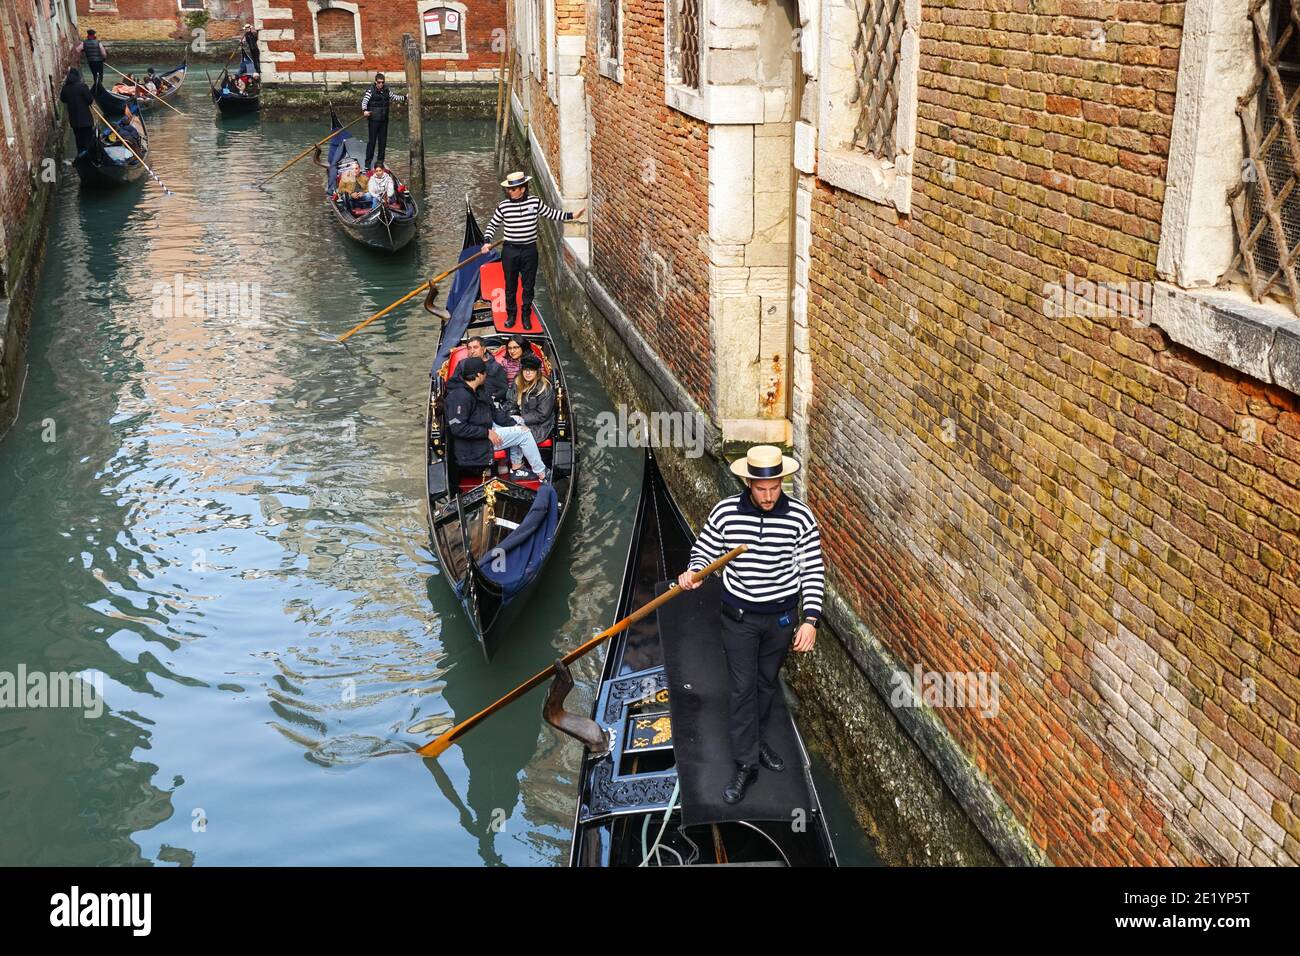 Gondoliers on traditional Venetian gondolas with tourists on the rio della Fava canal in Venice, Italy Stock Photo